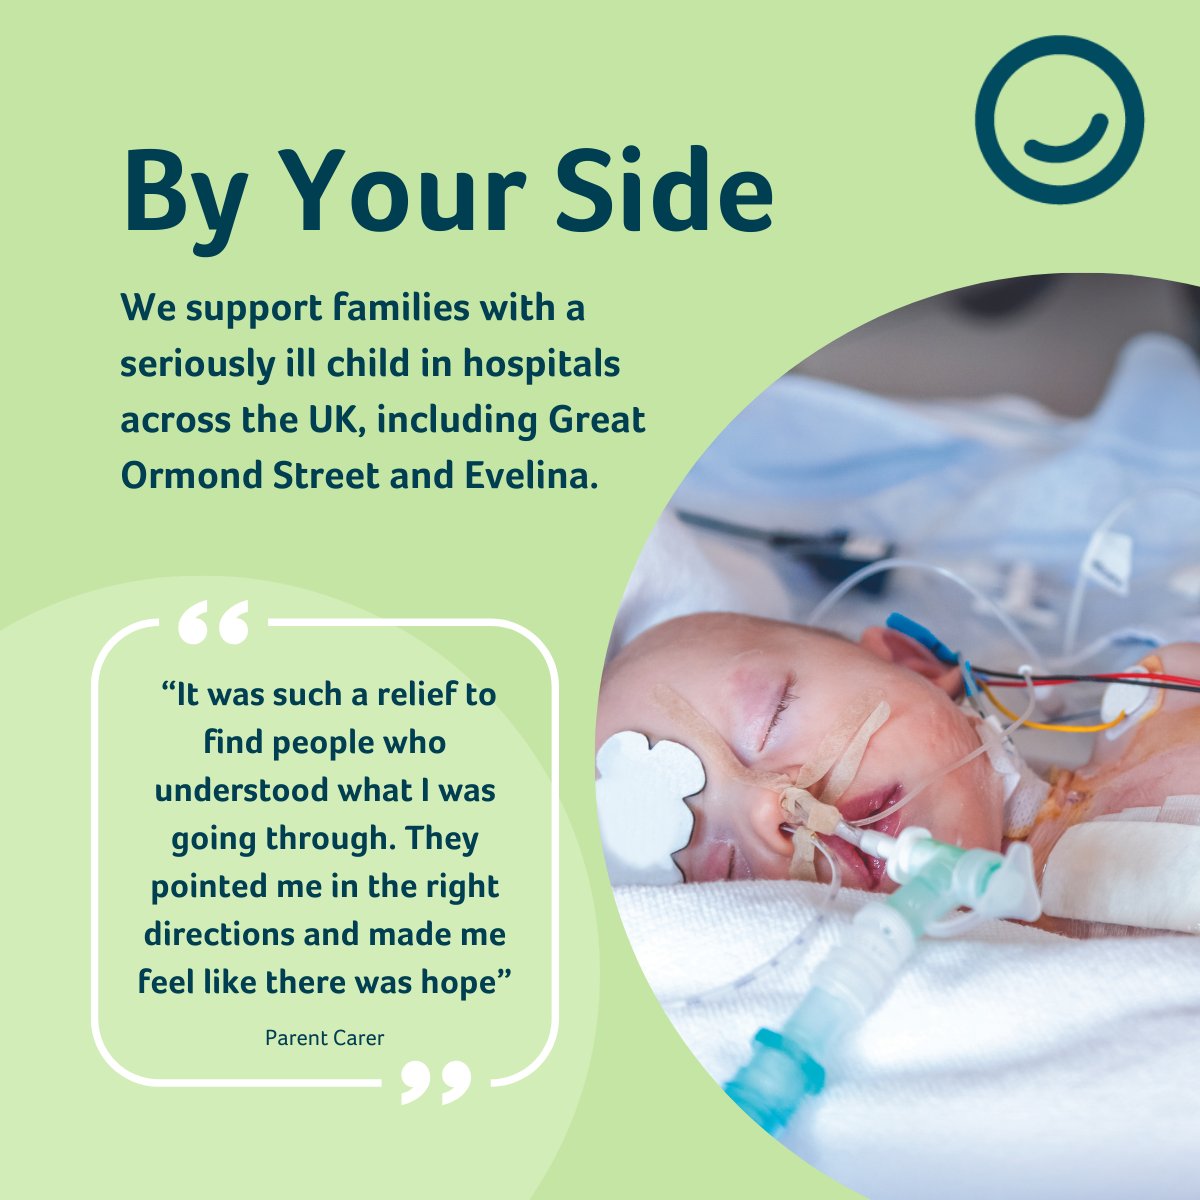 SPOTLIGHT ON CONTACT: 'By Your Side' Our By Your Side parent advisers are located in hospitals and other health settings, where they are able to guide parents through the maze of medical departments and jargon they face. Read more here: ow.ly/hOCA50RTSPQ